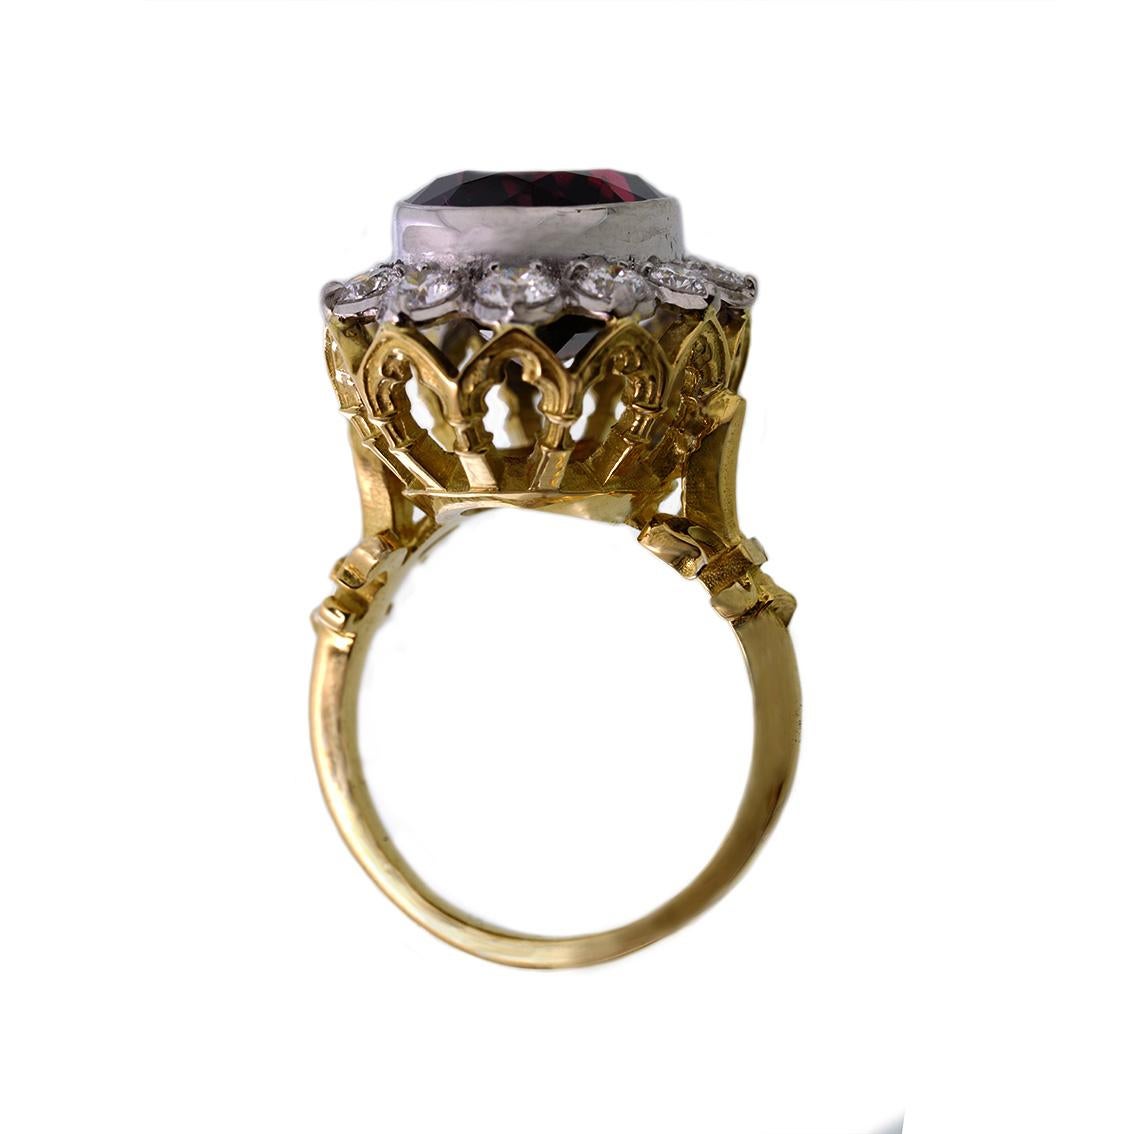 This divine ring is titled The Infinite Rapture ring and is one of a kind. Handmade in 18kt yellow and white gold this glorious ring features a central, deep red garnet approximately 11ct in weight. A halo of 12 diamonds surround the garnet weighing